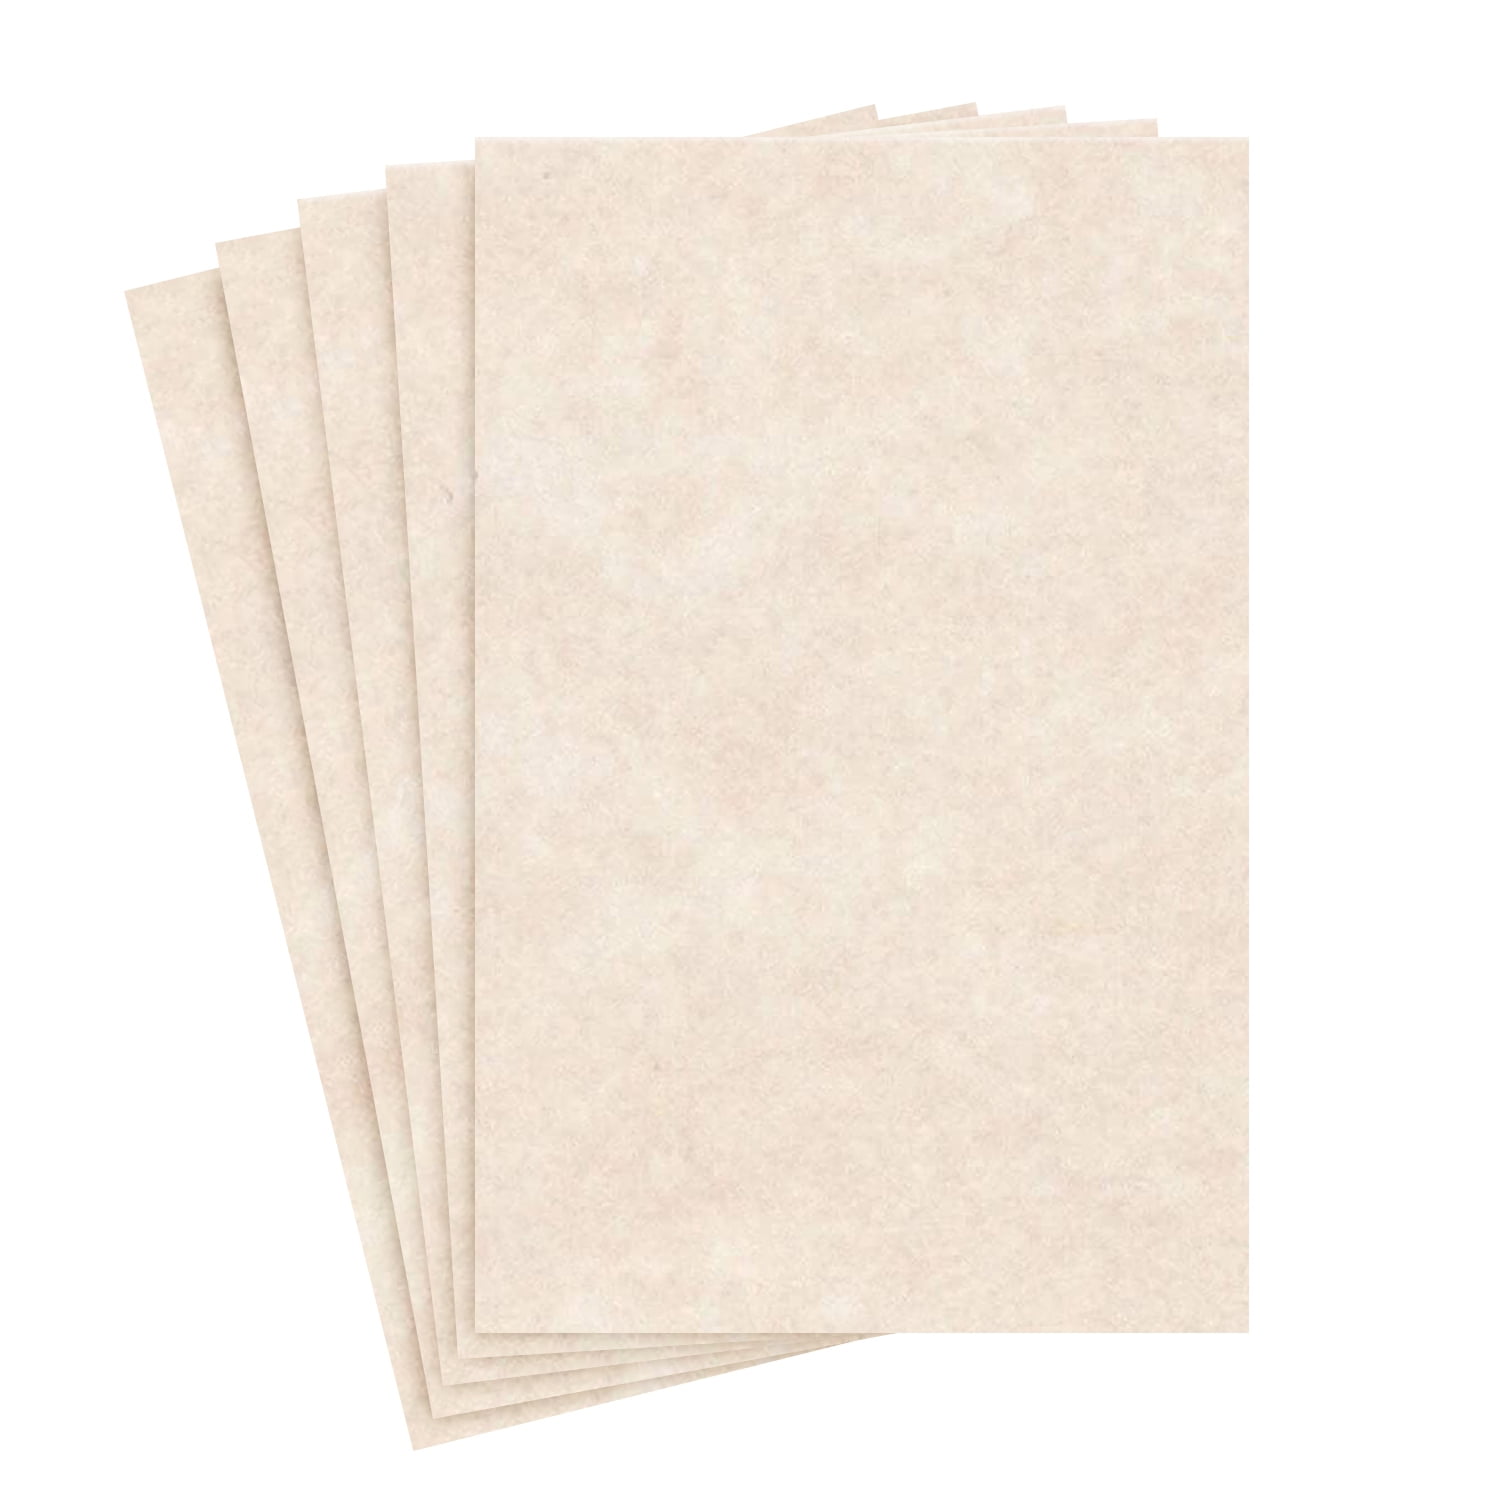 Color Card Stock Paper Cream 50 Sheets Per Pack 11 x 17 